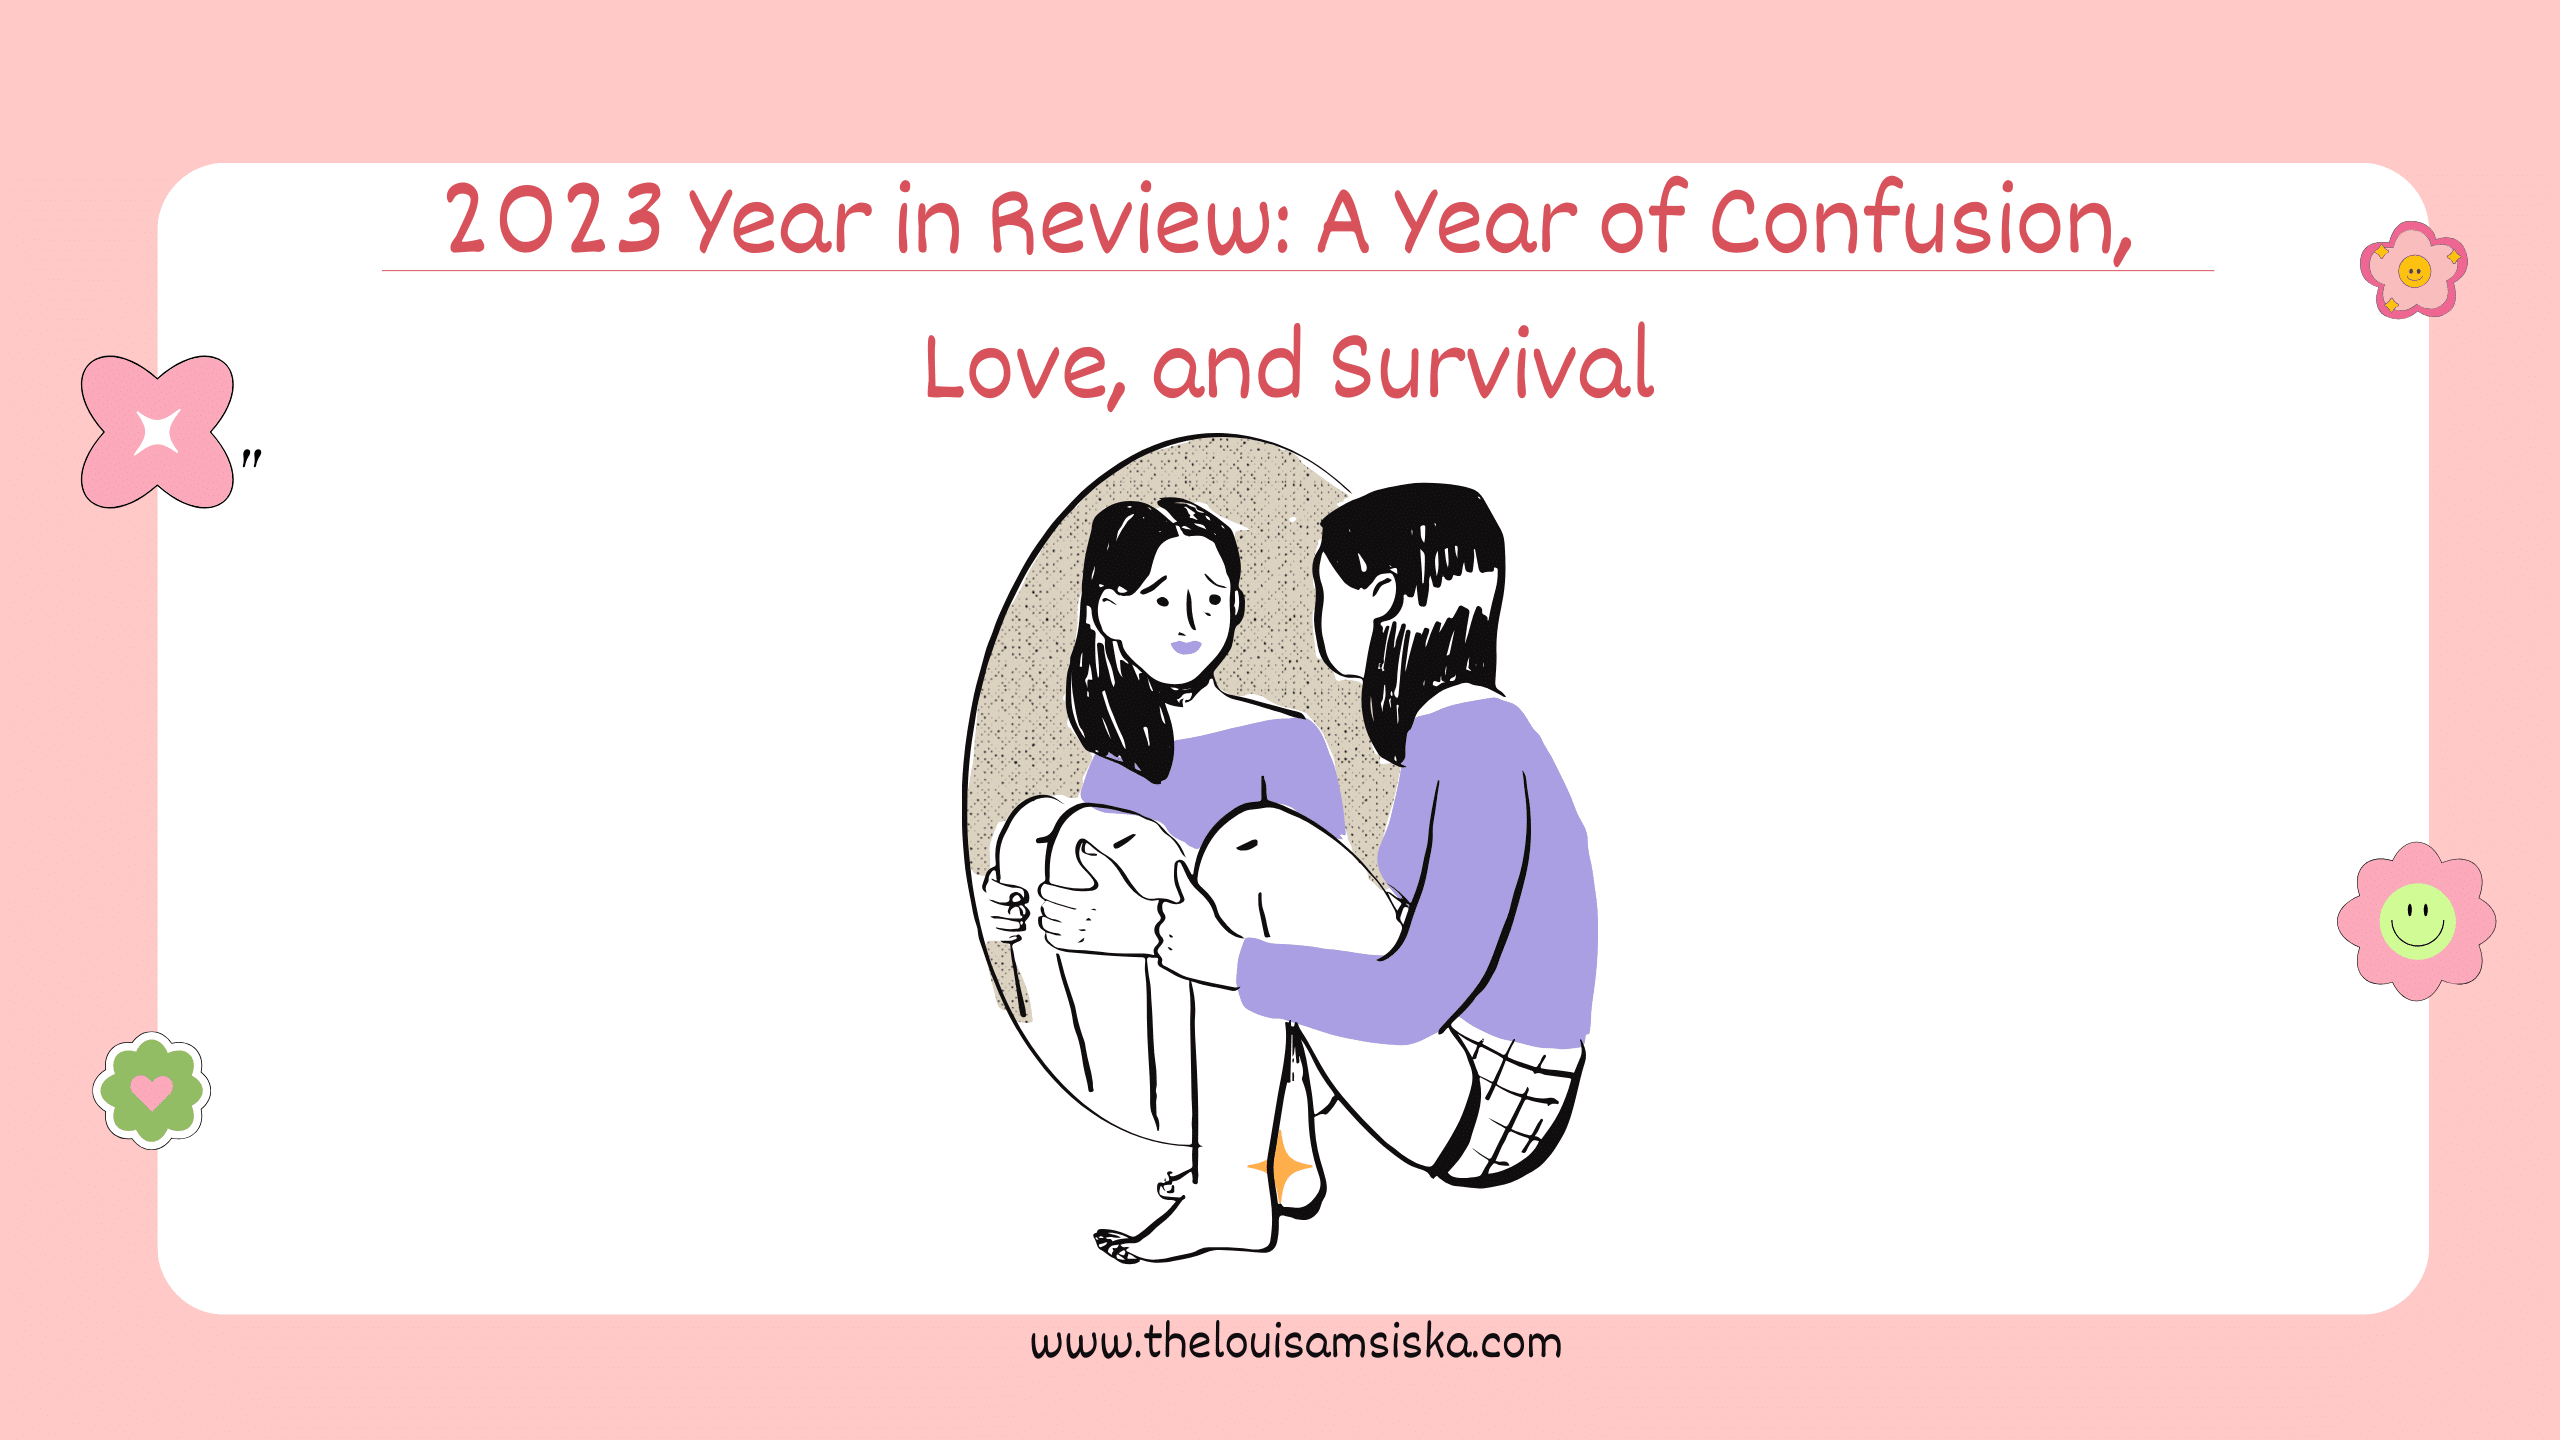 2023 Year in Review: A Year of Confusion, Love, and Survival